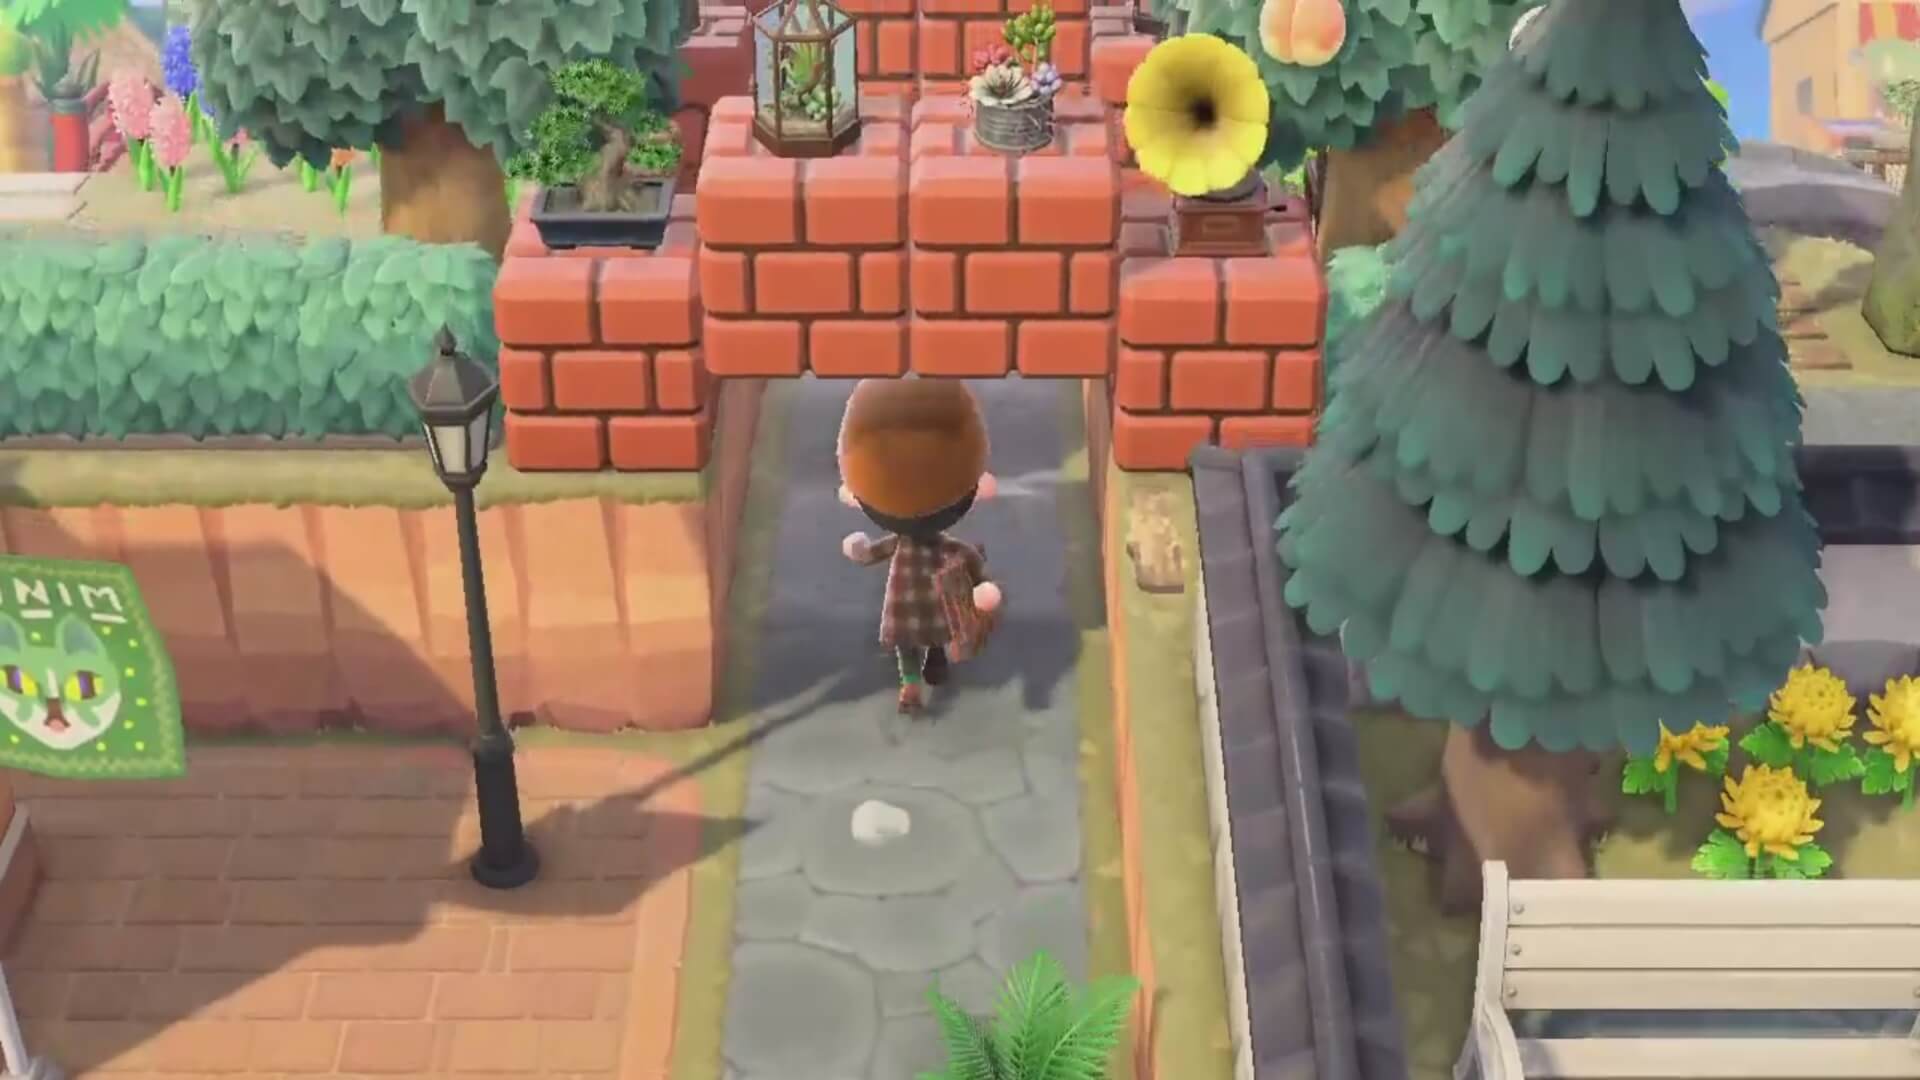 A villager showing off some floating block arches in Animal Crossing.